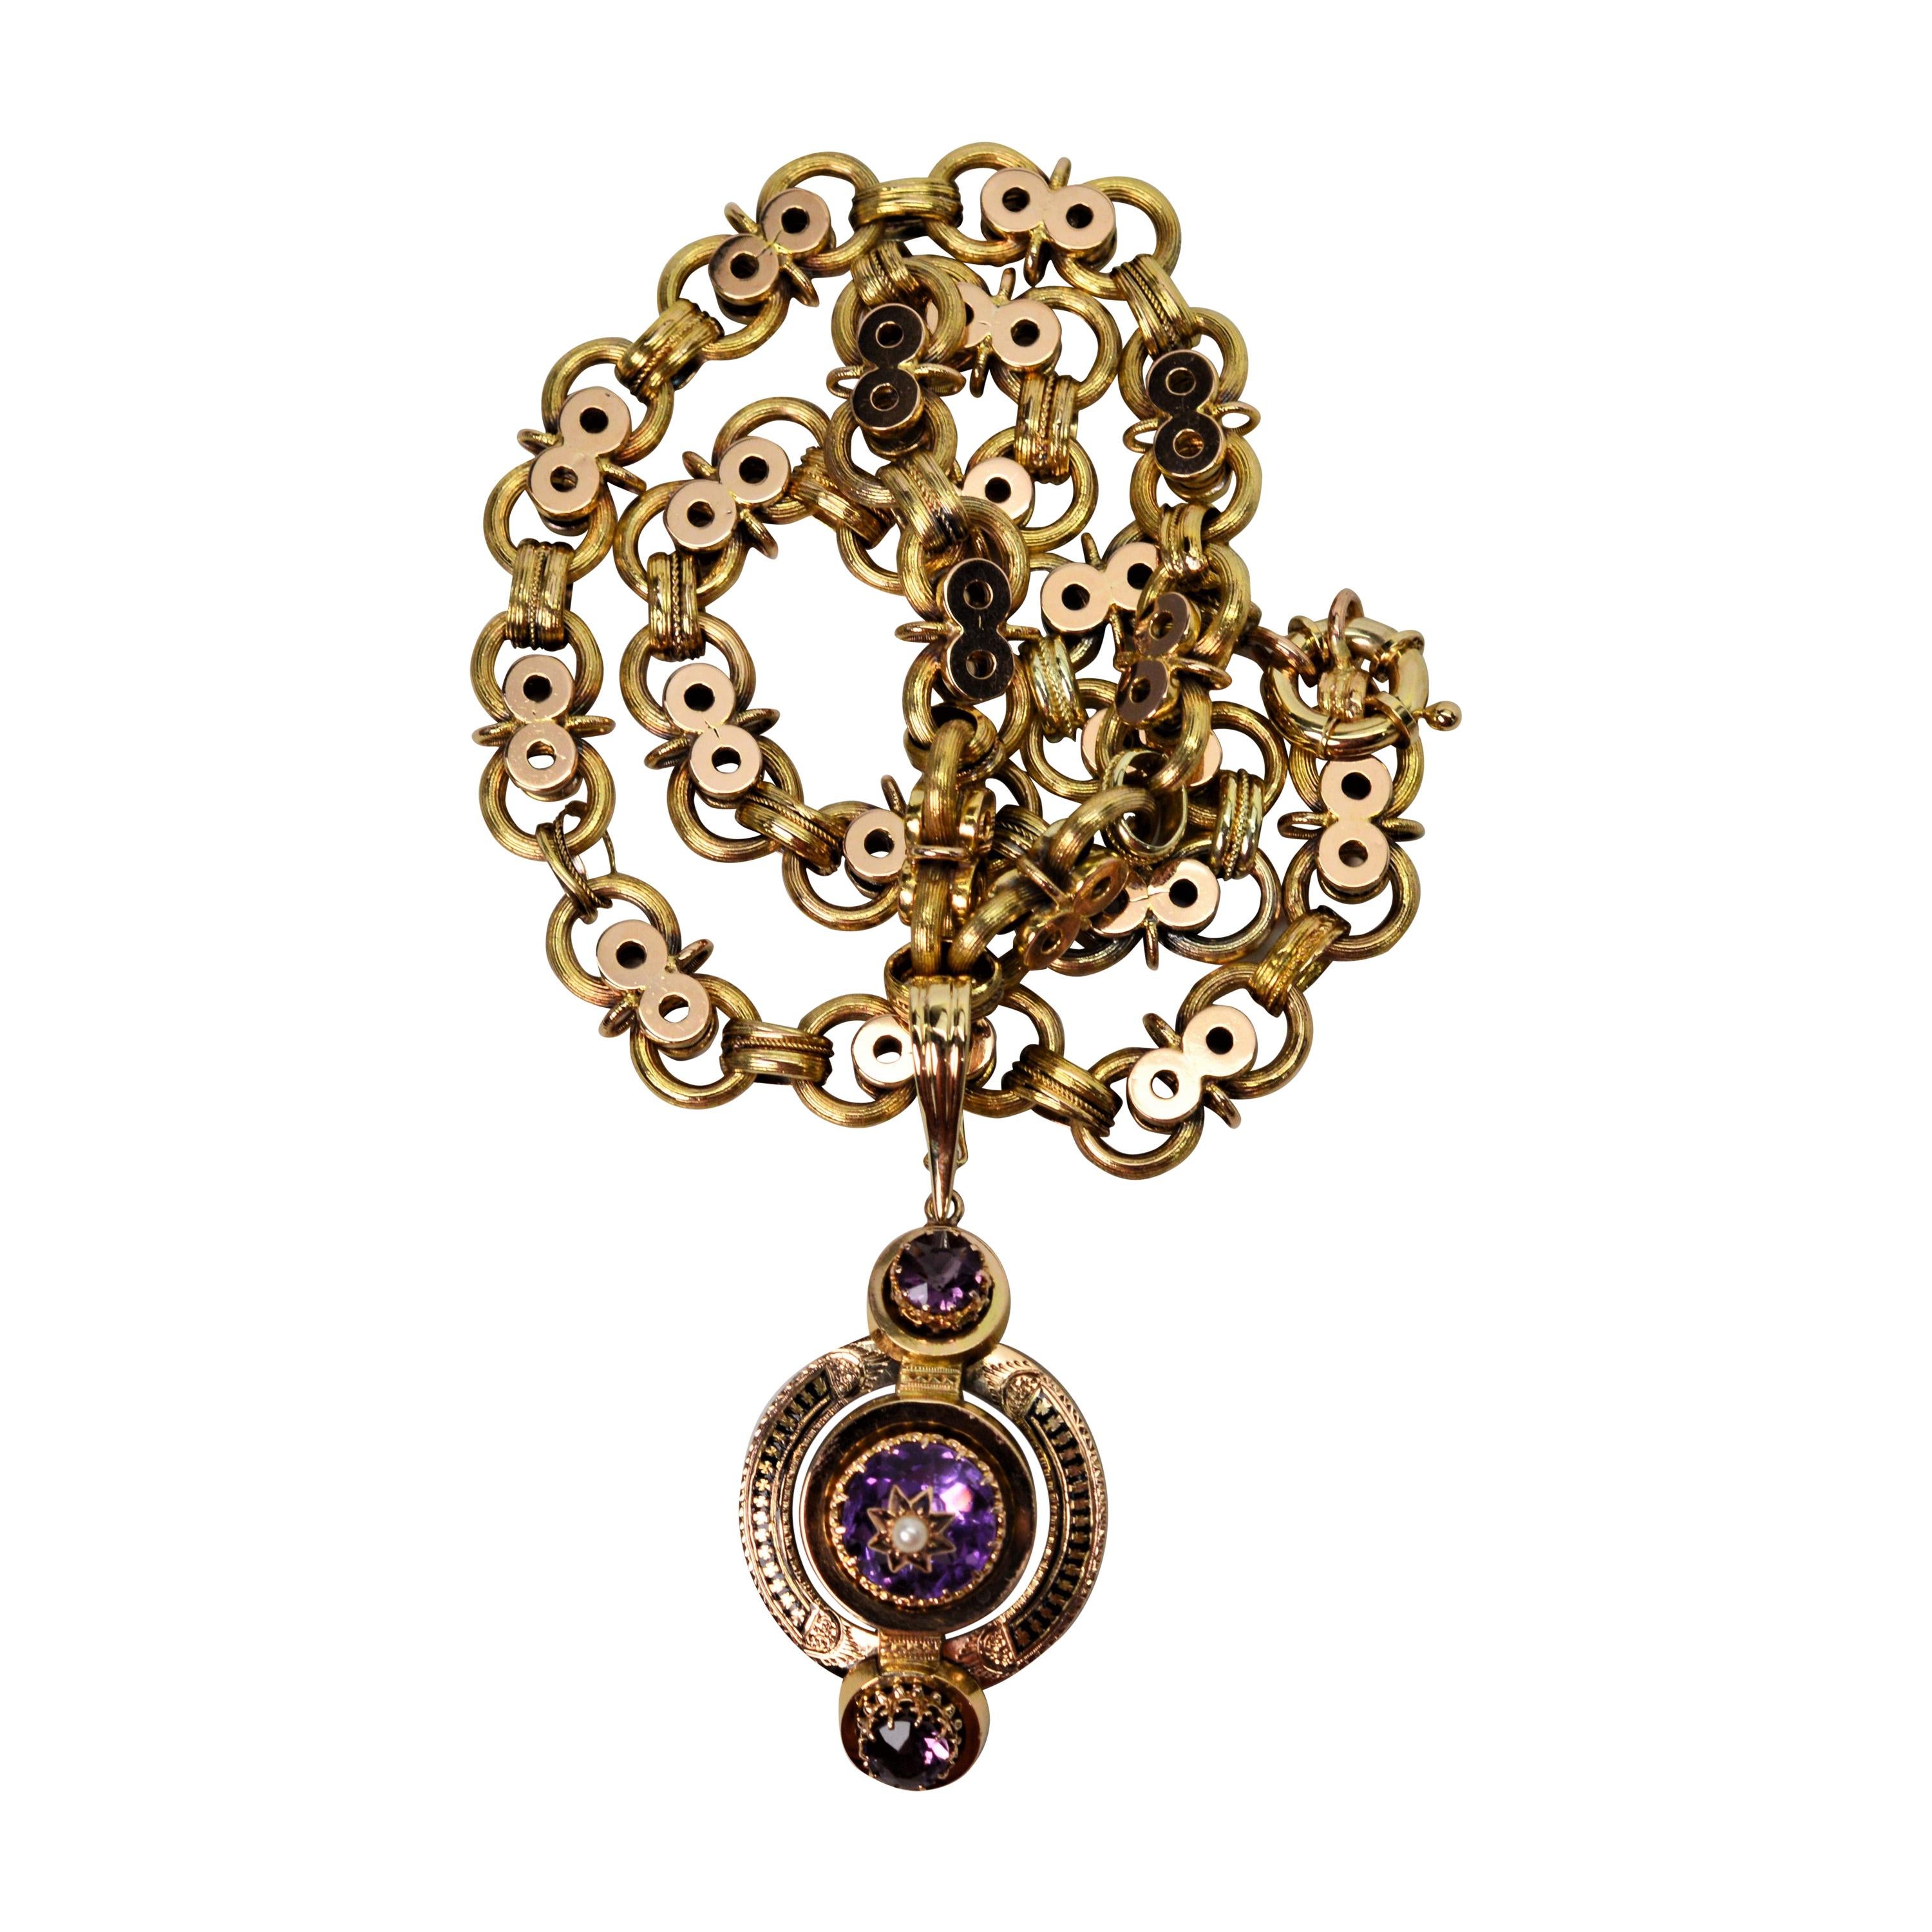 Antique Gold Necklace with Amethyst Pendant Enhancer